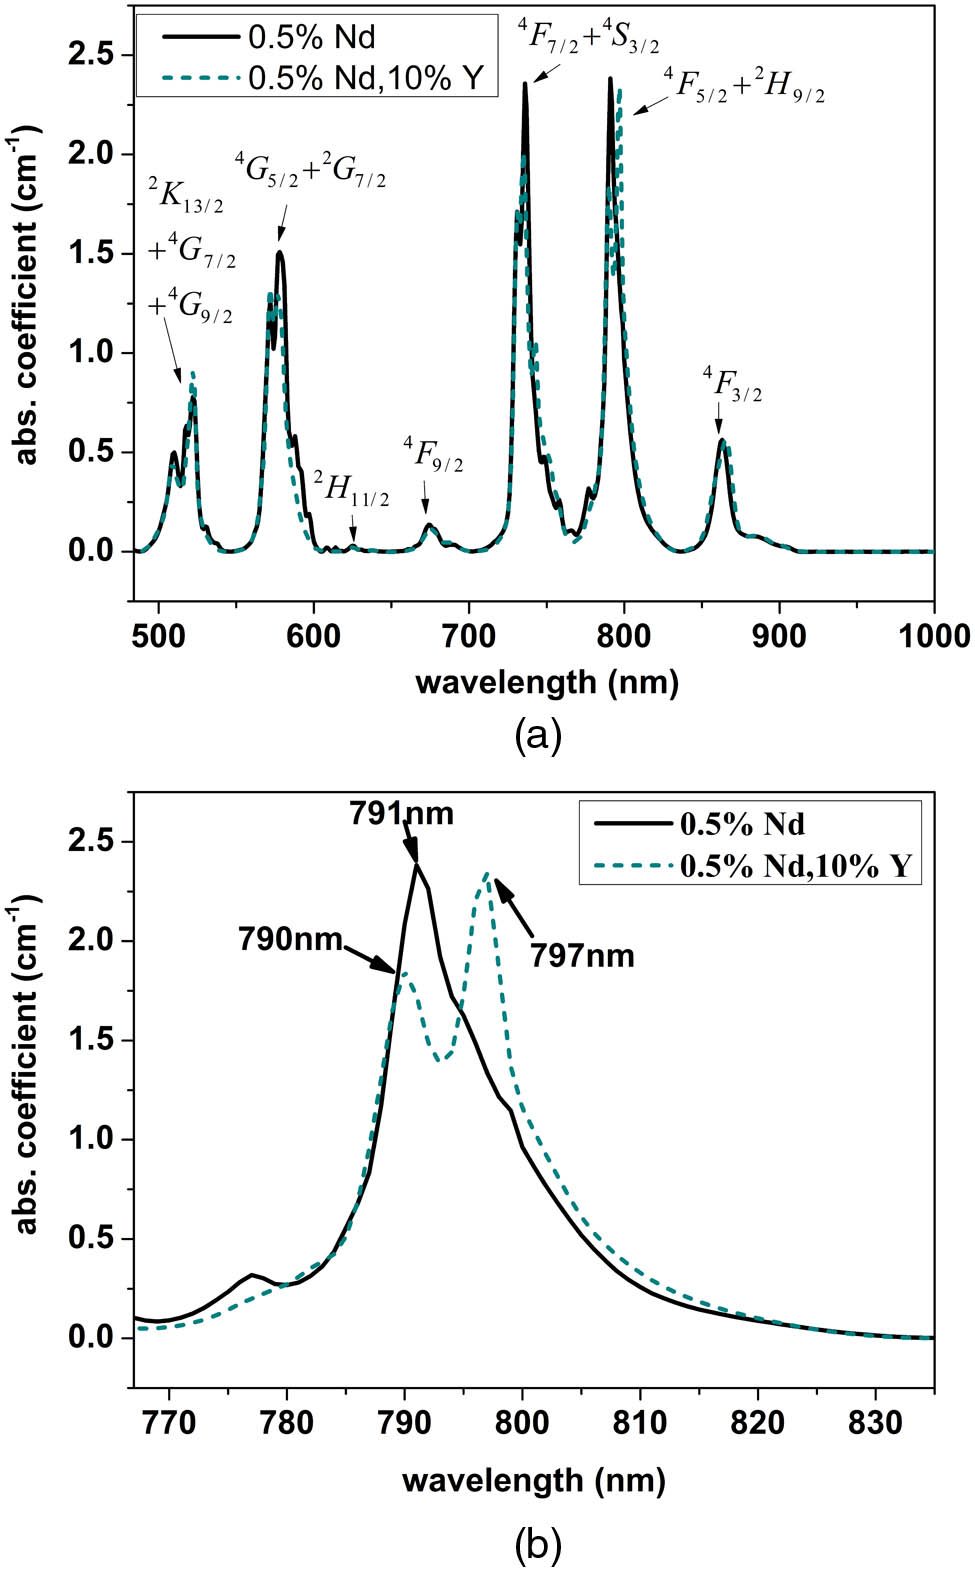 Room-temperature absorption spectra of (a) the 0.5% Nd:CaF2 crystal, which is 484–1000 nm and (b) the 0.5% Nd, 10% Y:CaF2 crystal, which is 767-835 nm.